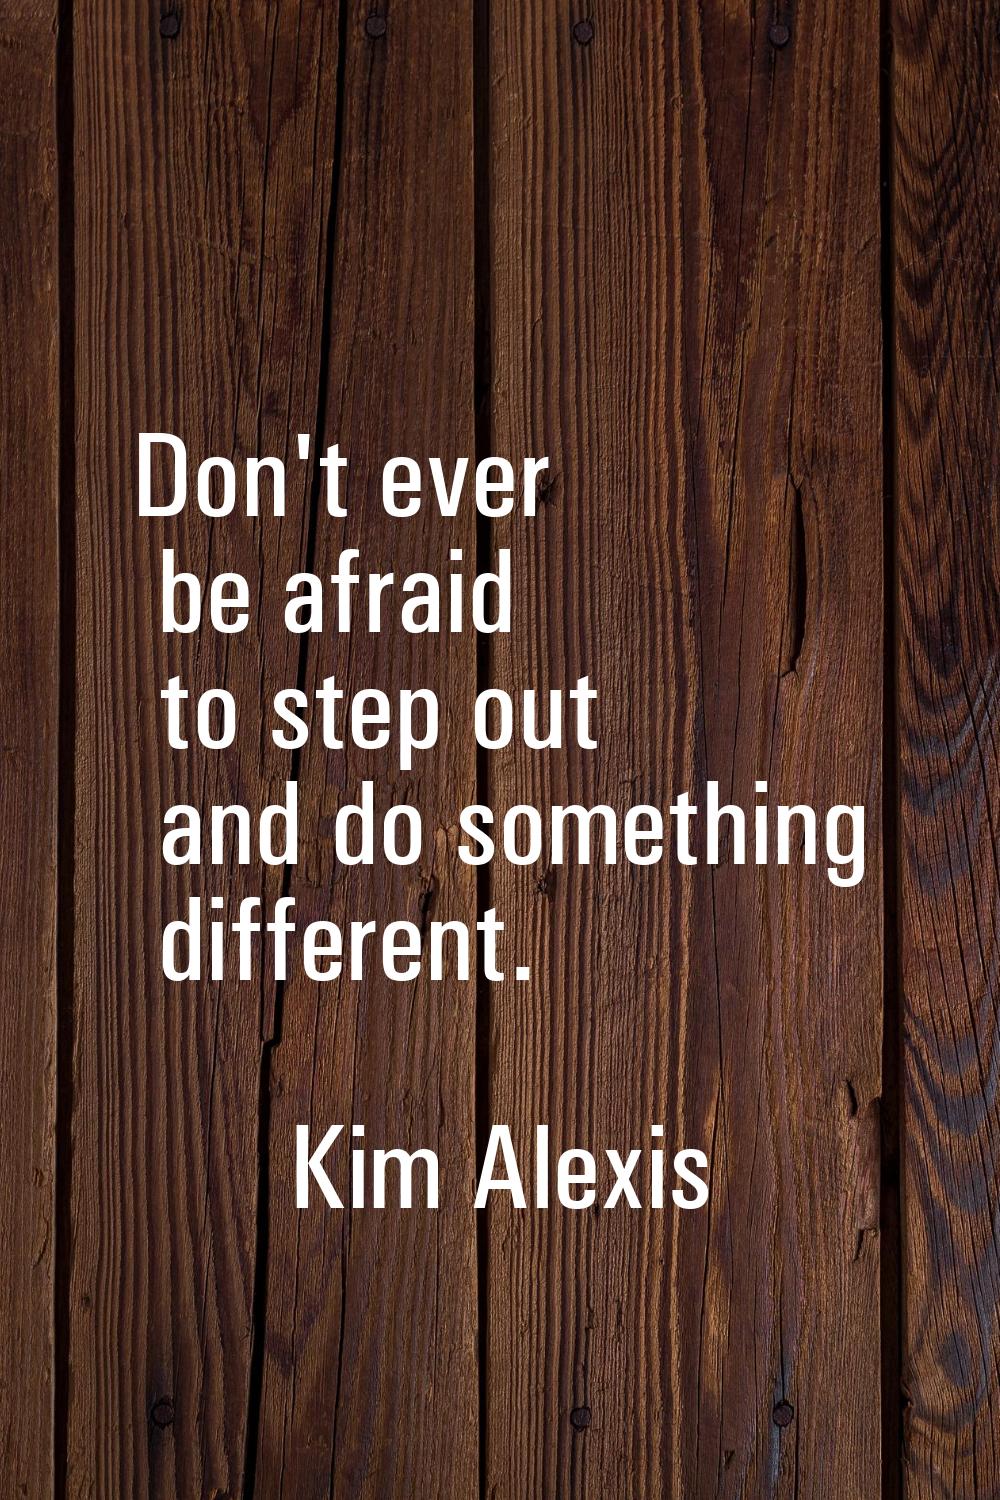 Don't ever be afraid to step out and do something different.